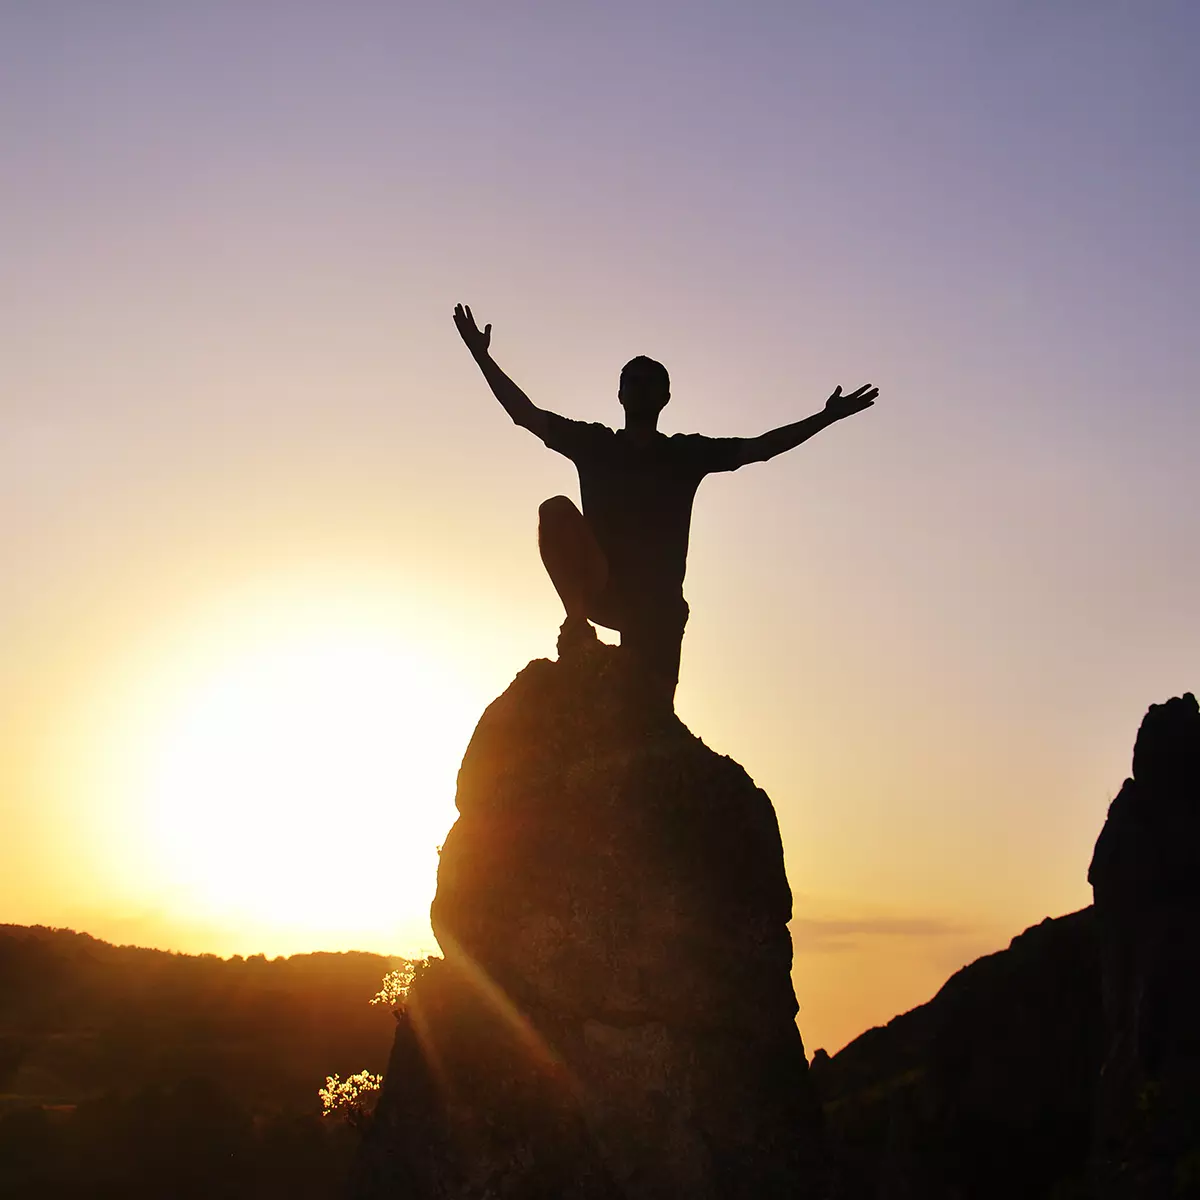 Man on top of mountain with his hands raised in celebration